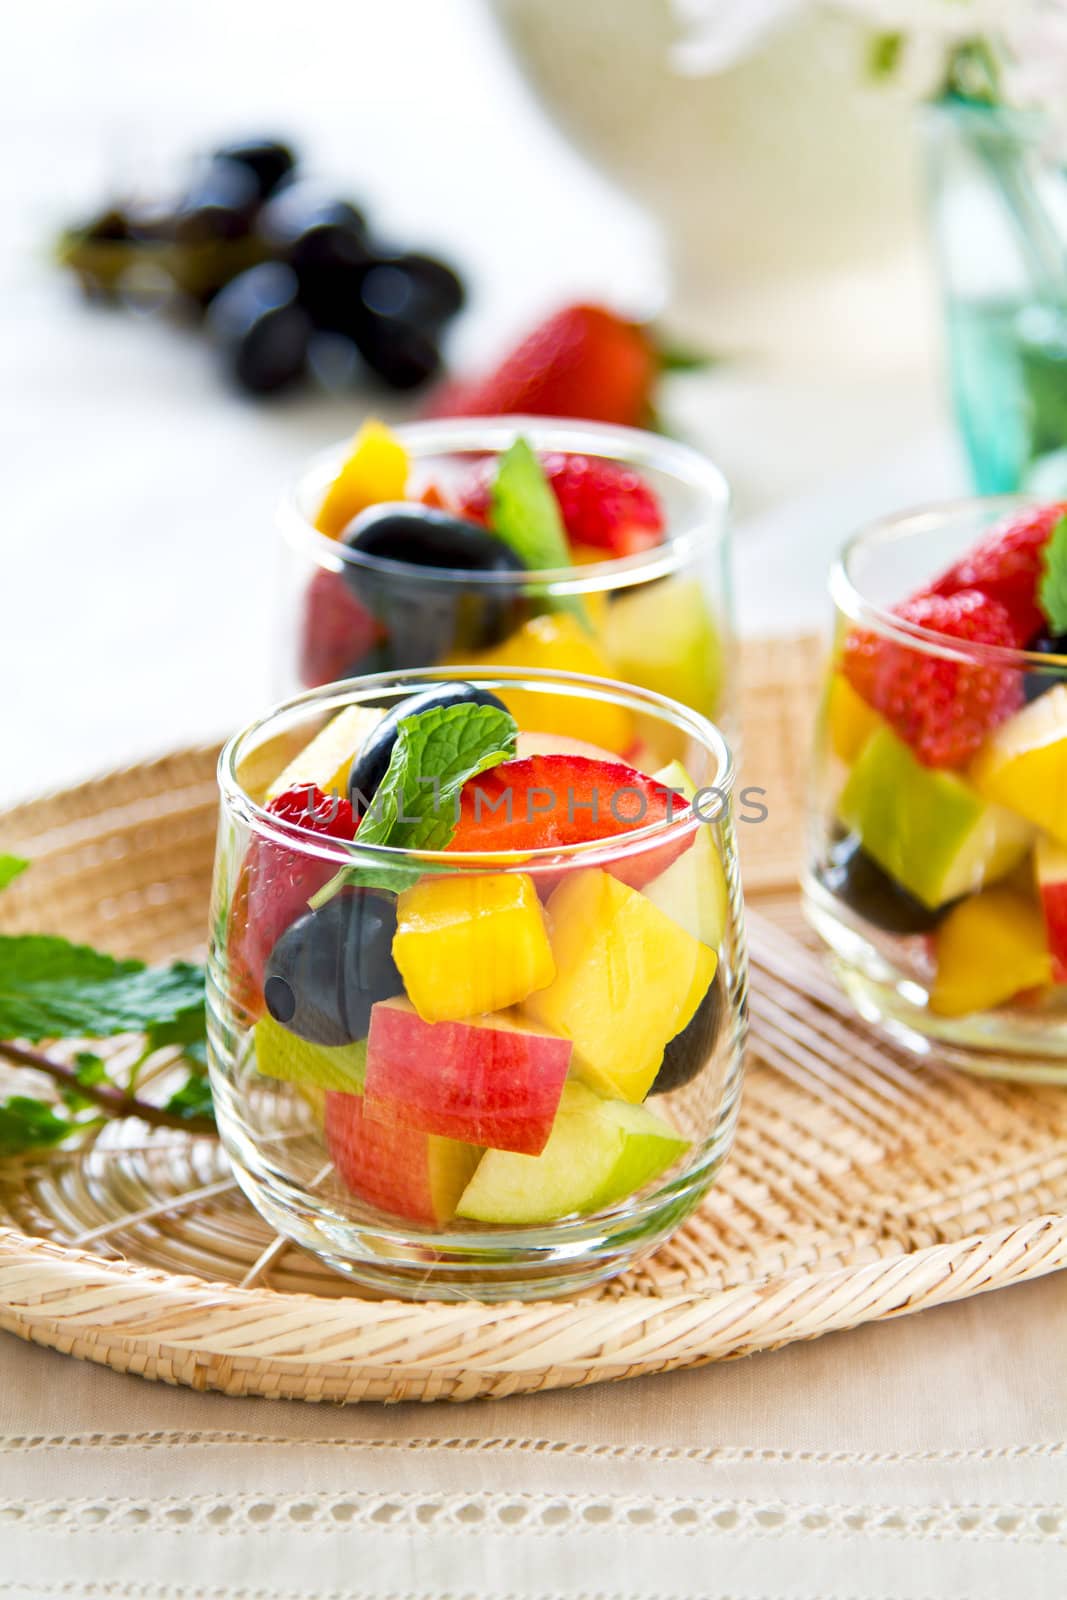 Varieties of fruits salad in small glass







Varieties of fruits as in small glass